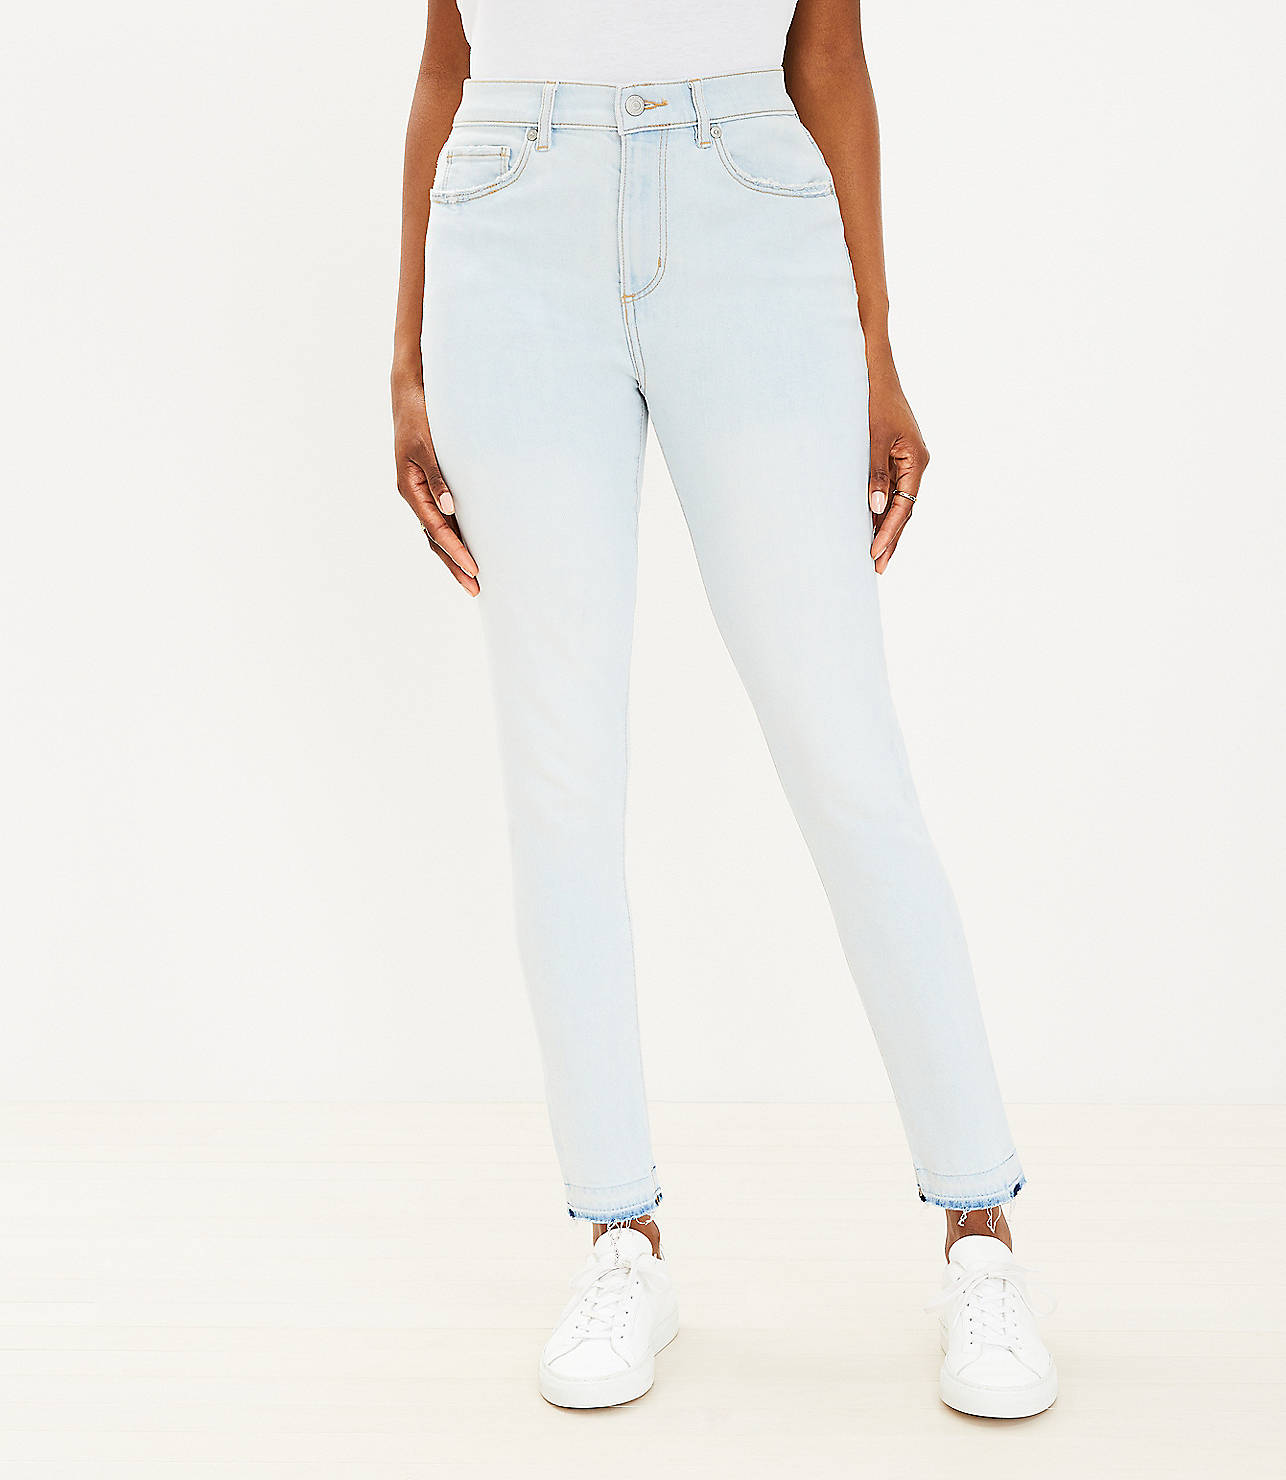 Curvy Unpicked Hem High Rise Skinny Jeans in Soft Washed Blue